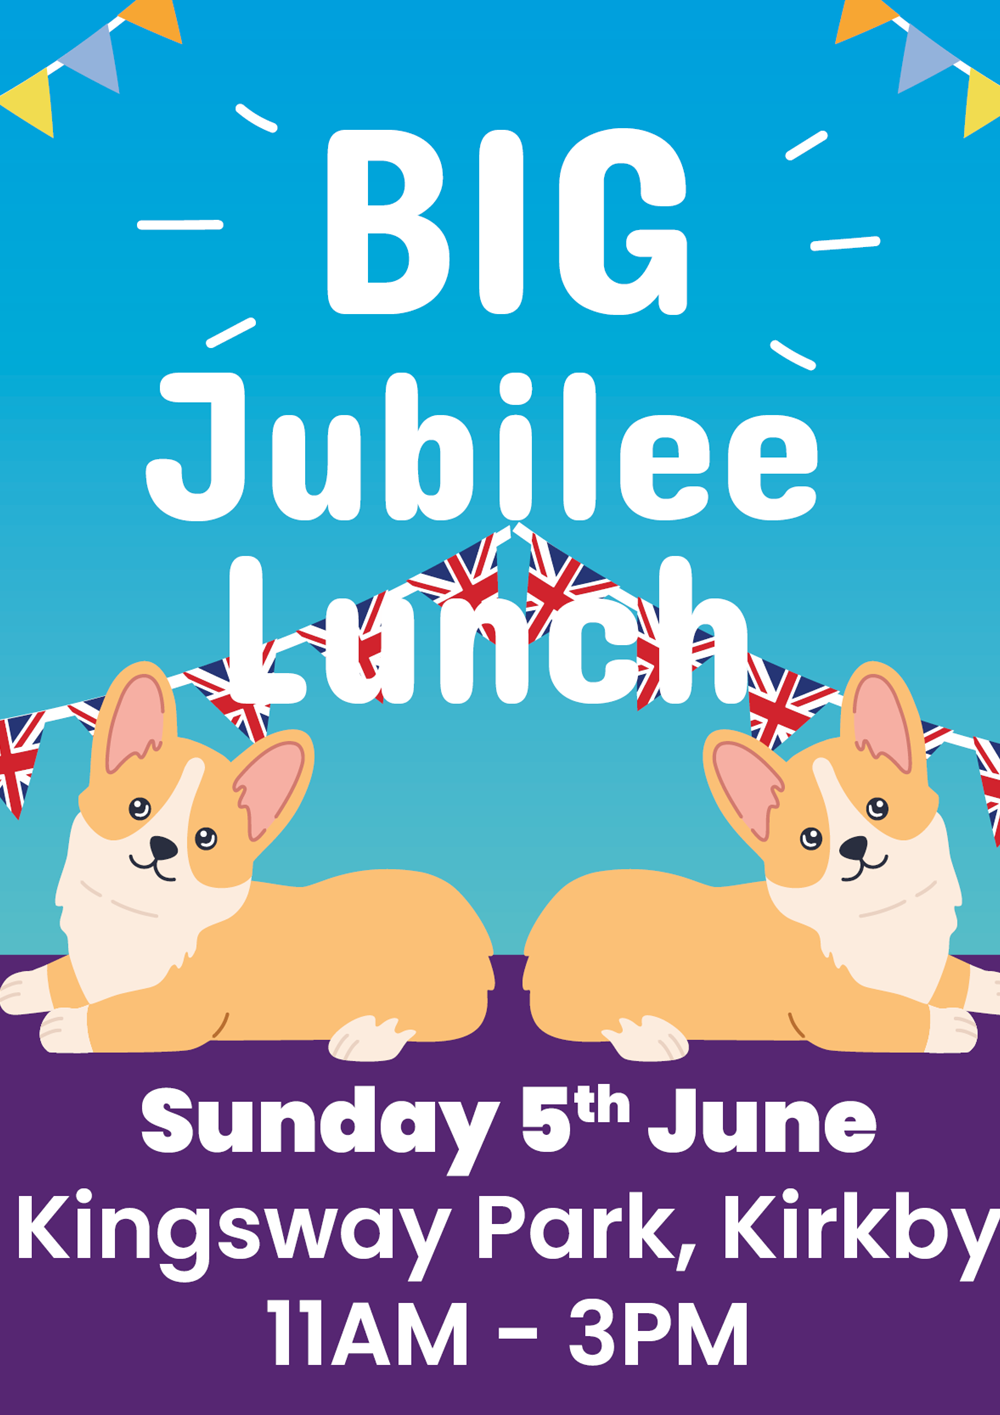 BIG Jubilee Lunch, Sunday 5 June, Kingsway Park, Kirkby, 11am to 3pm